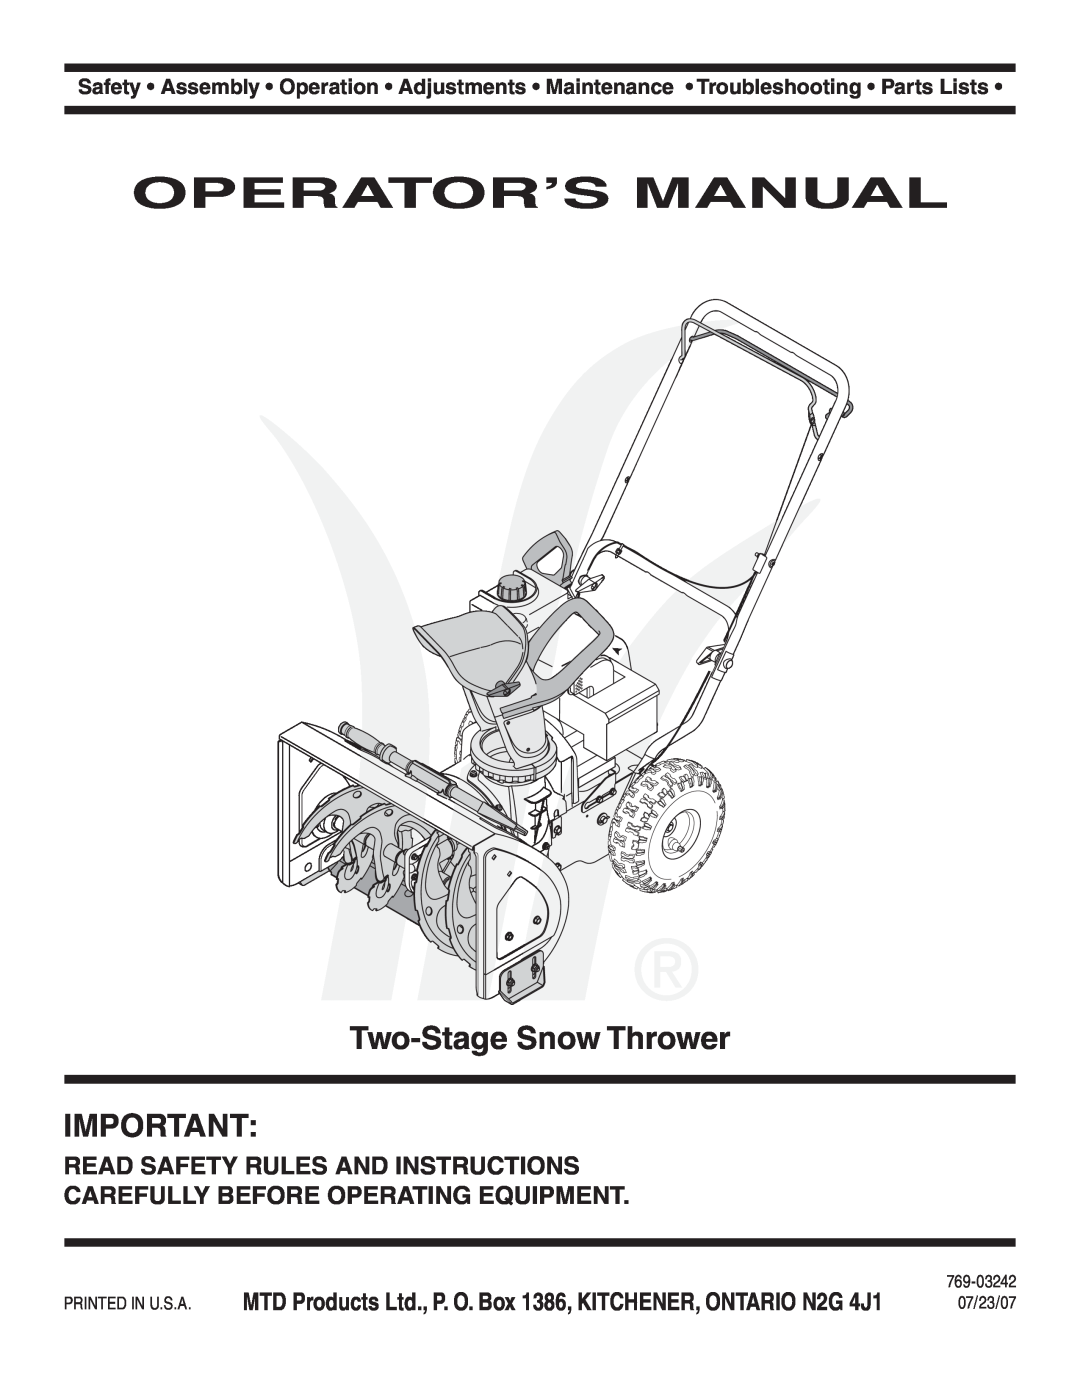 MTD Style L manual Operator’S Manual, Two-Stage Snow Thrower, Read Safety Rules And Instructions 